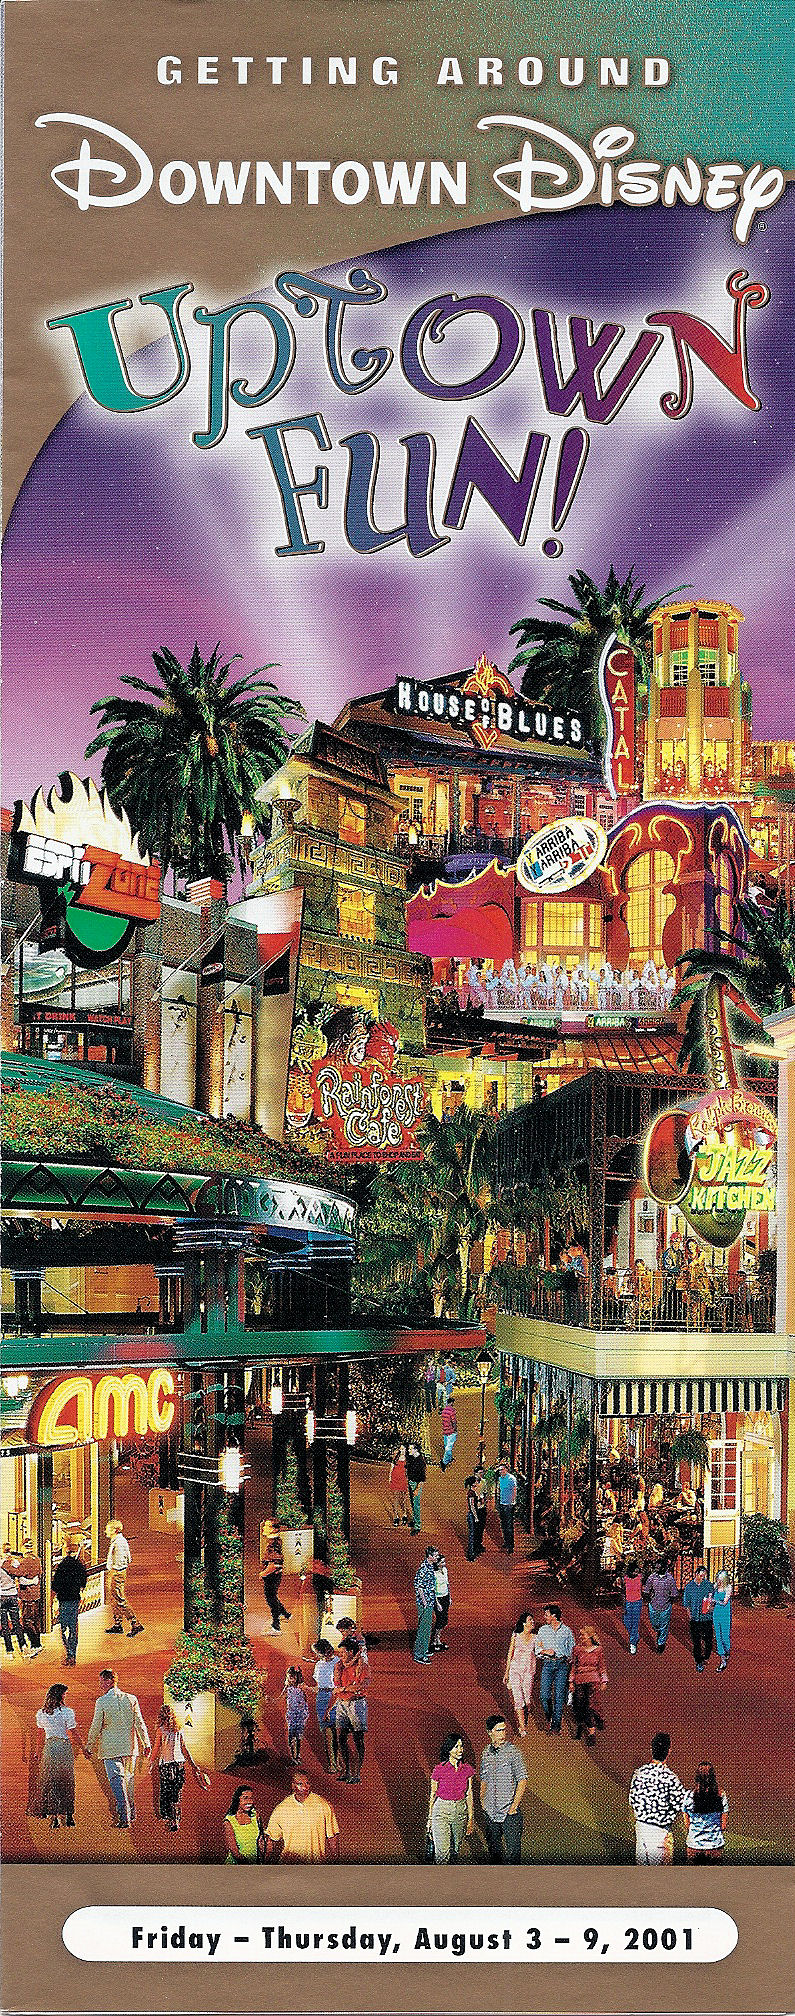 The cover of a guide map to Downtown Disney, Disneyland Resort.